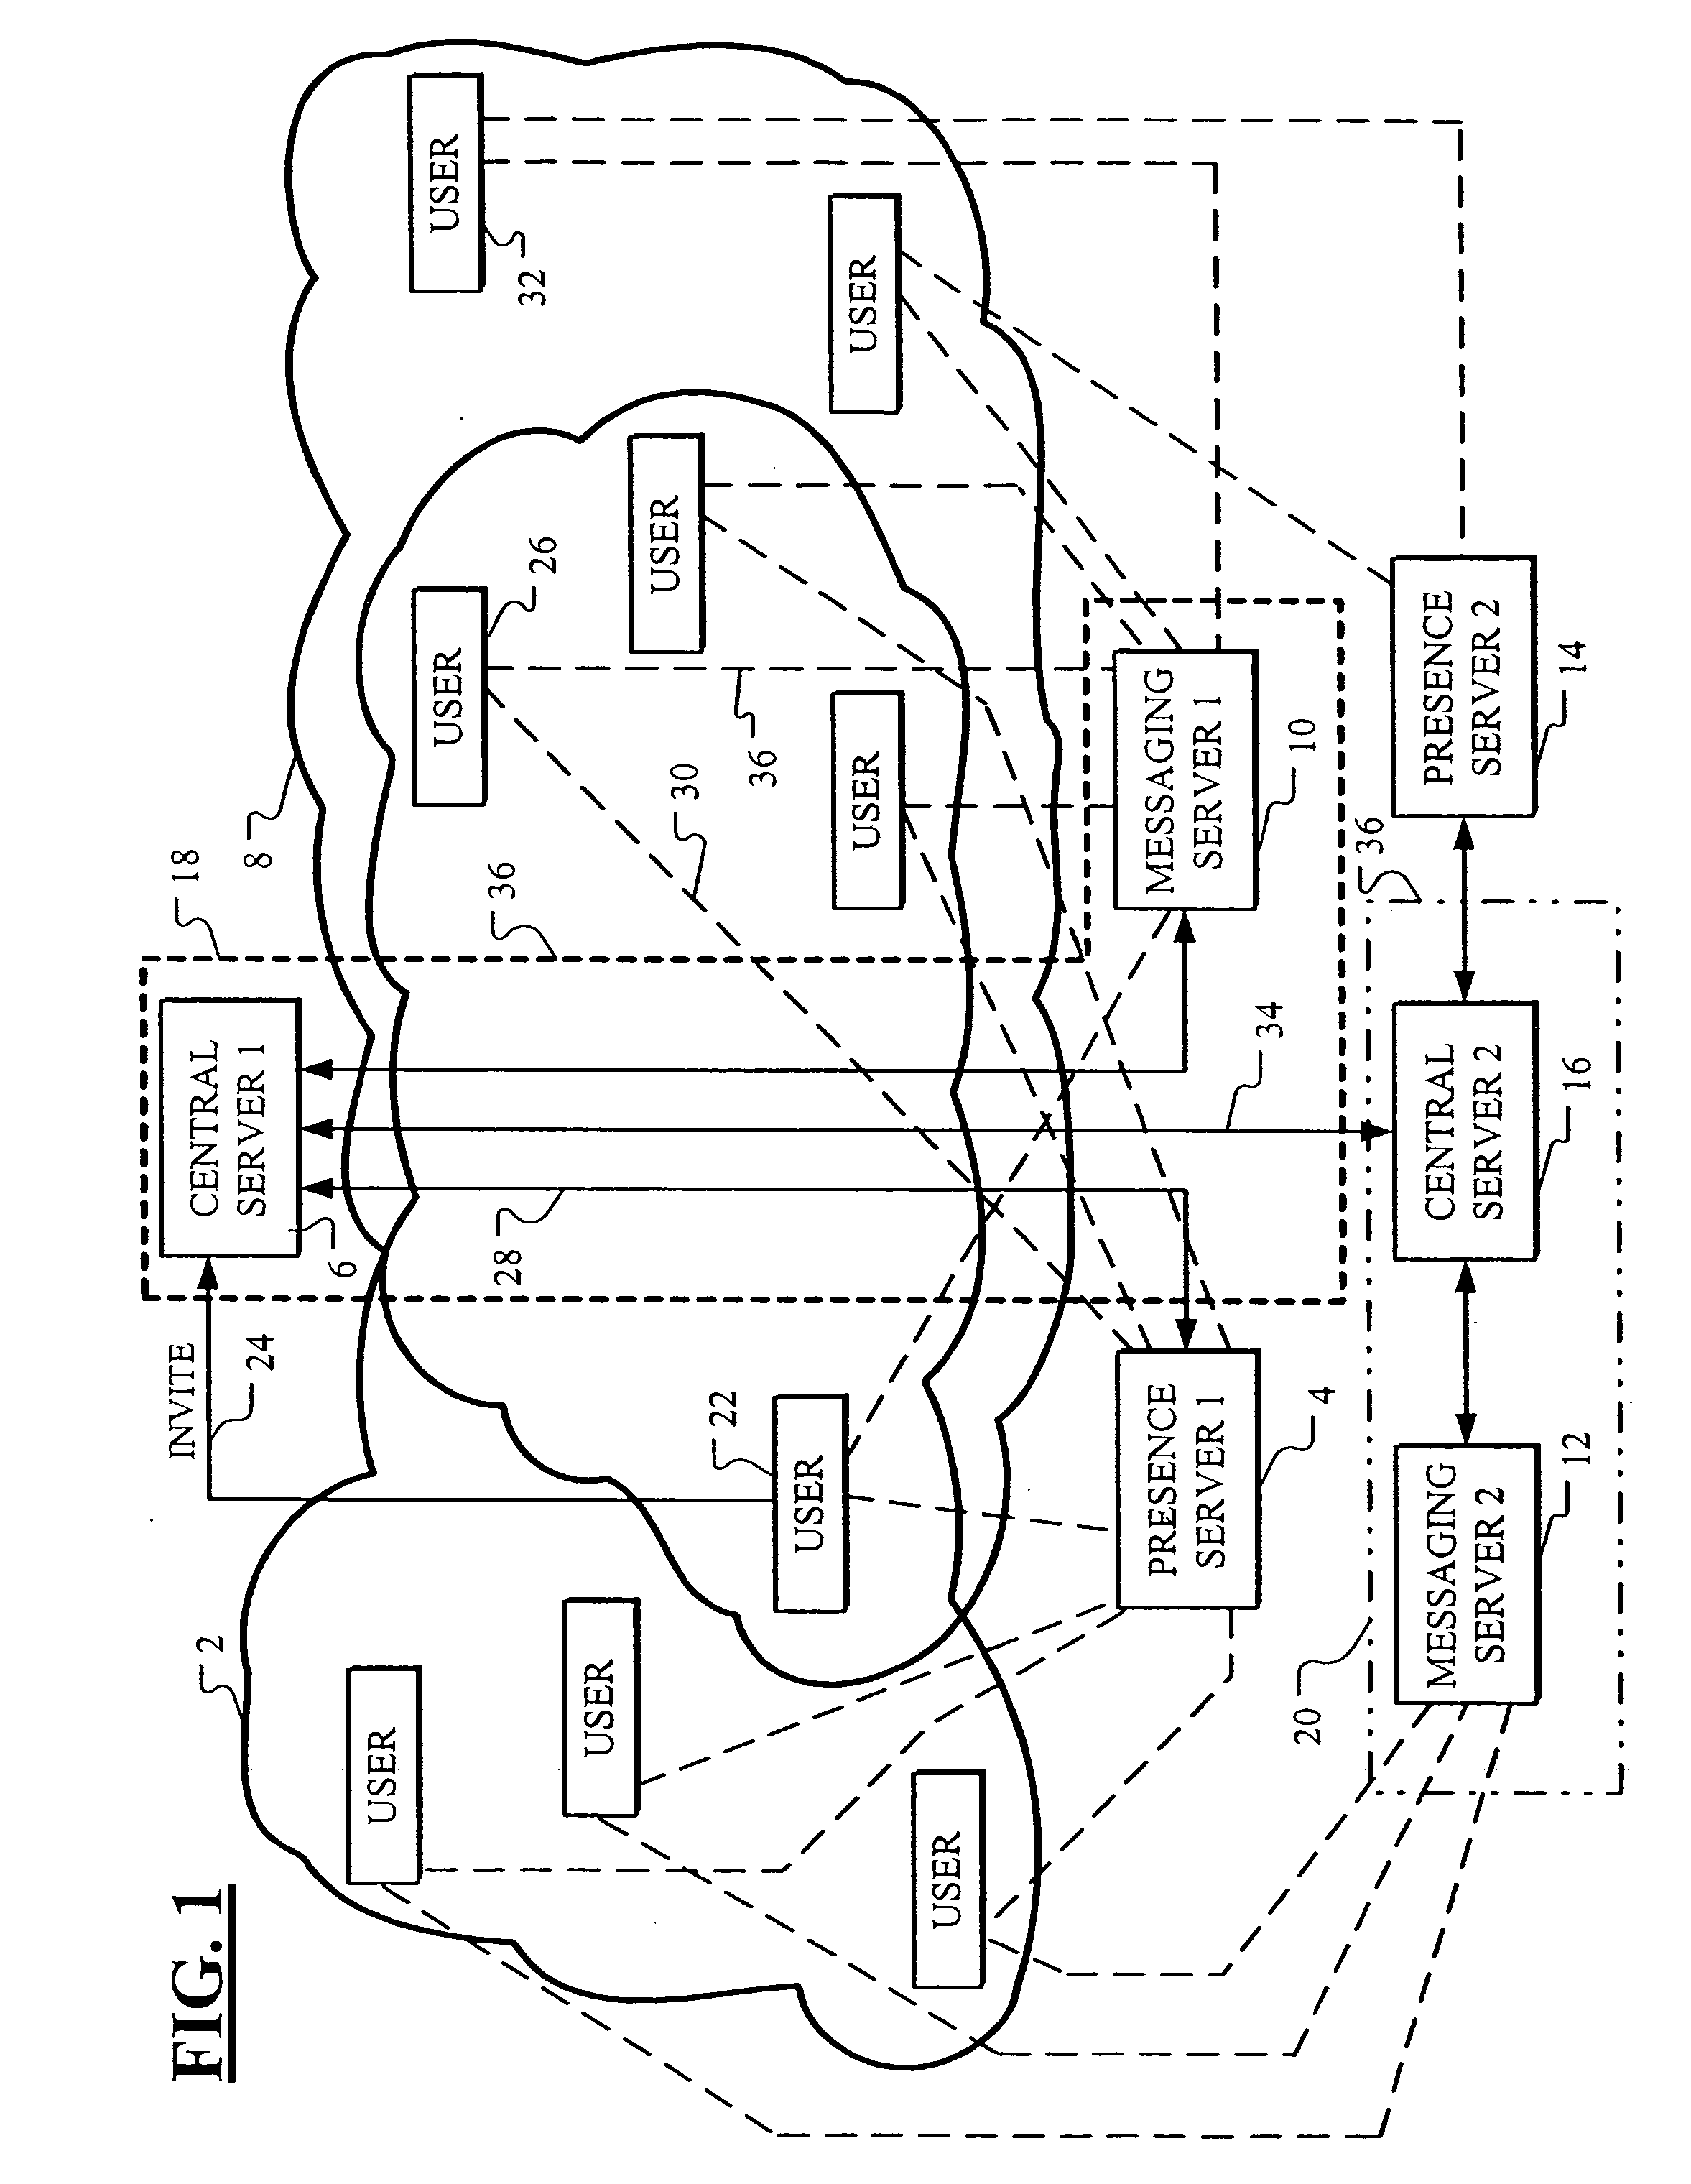 System and methods for using an application layer control protocol transporting spatial location information pertaining to devices connected to wired and wireless Internet protocol networks